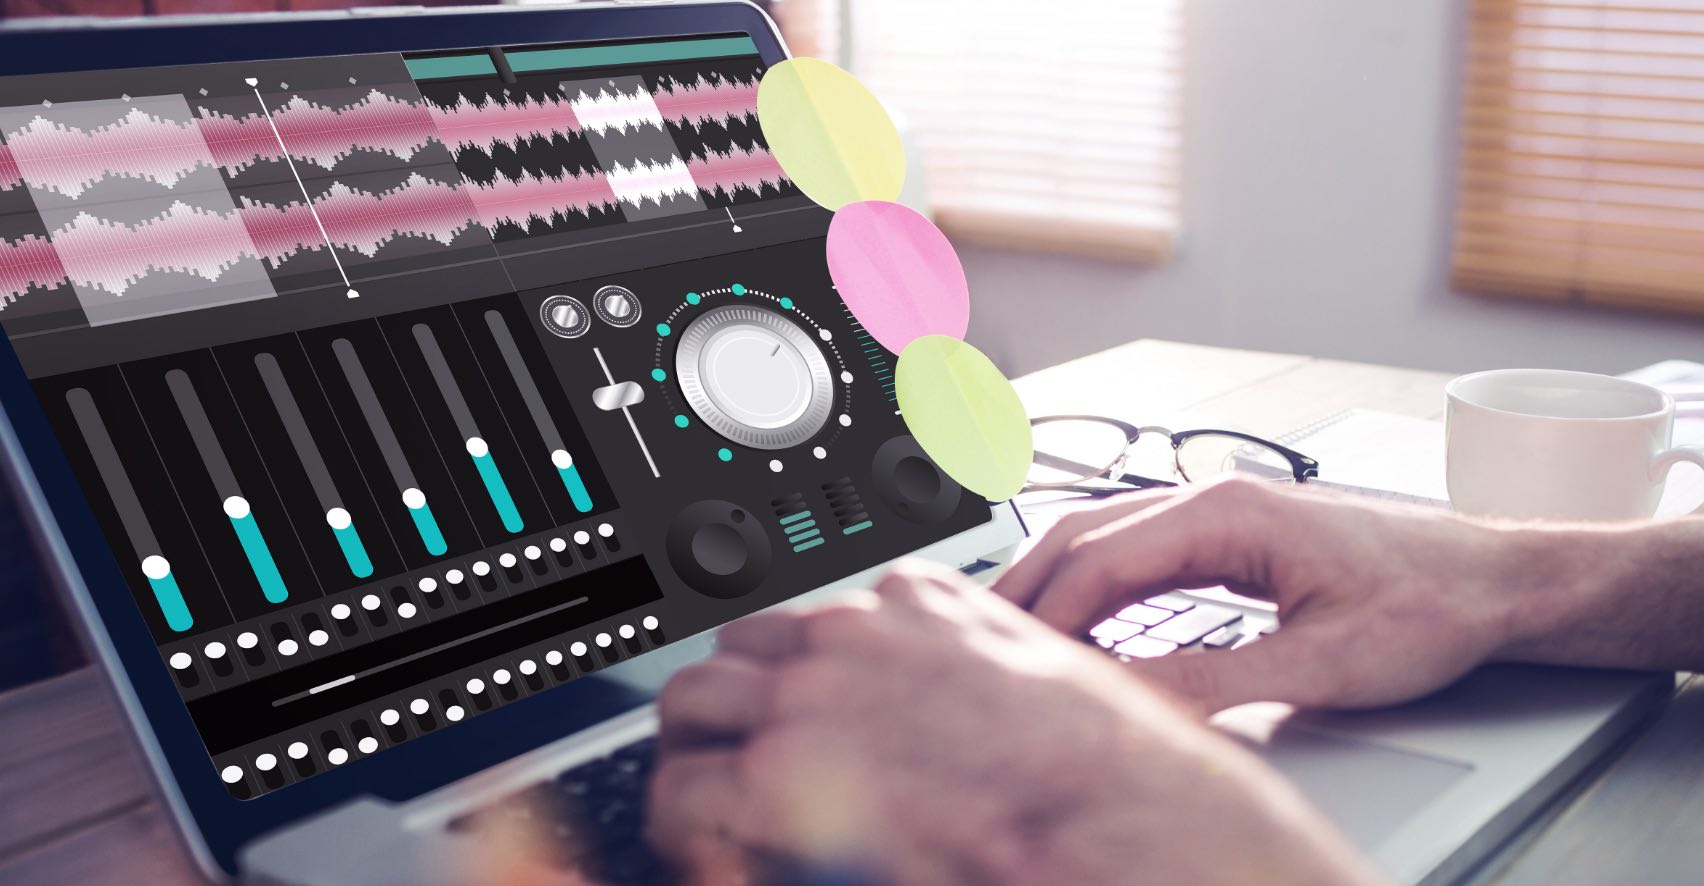 What exactly is the perfect laptop for music production?